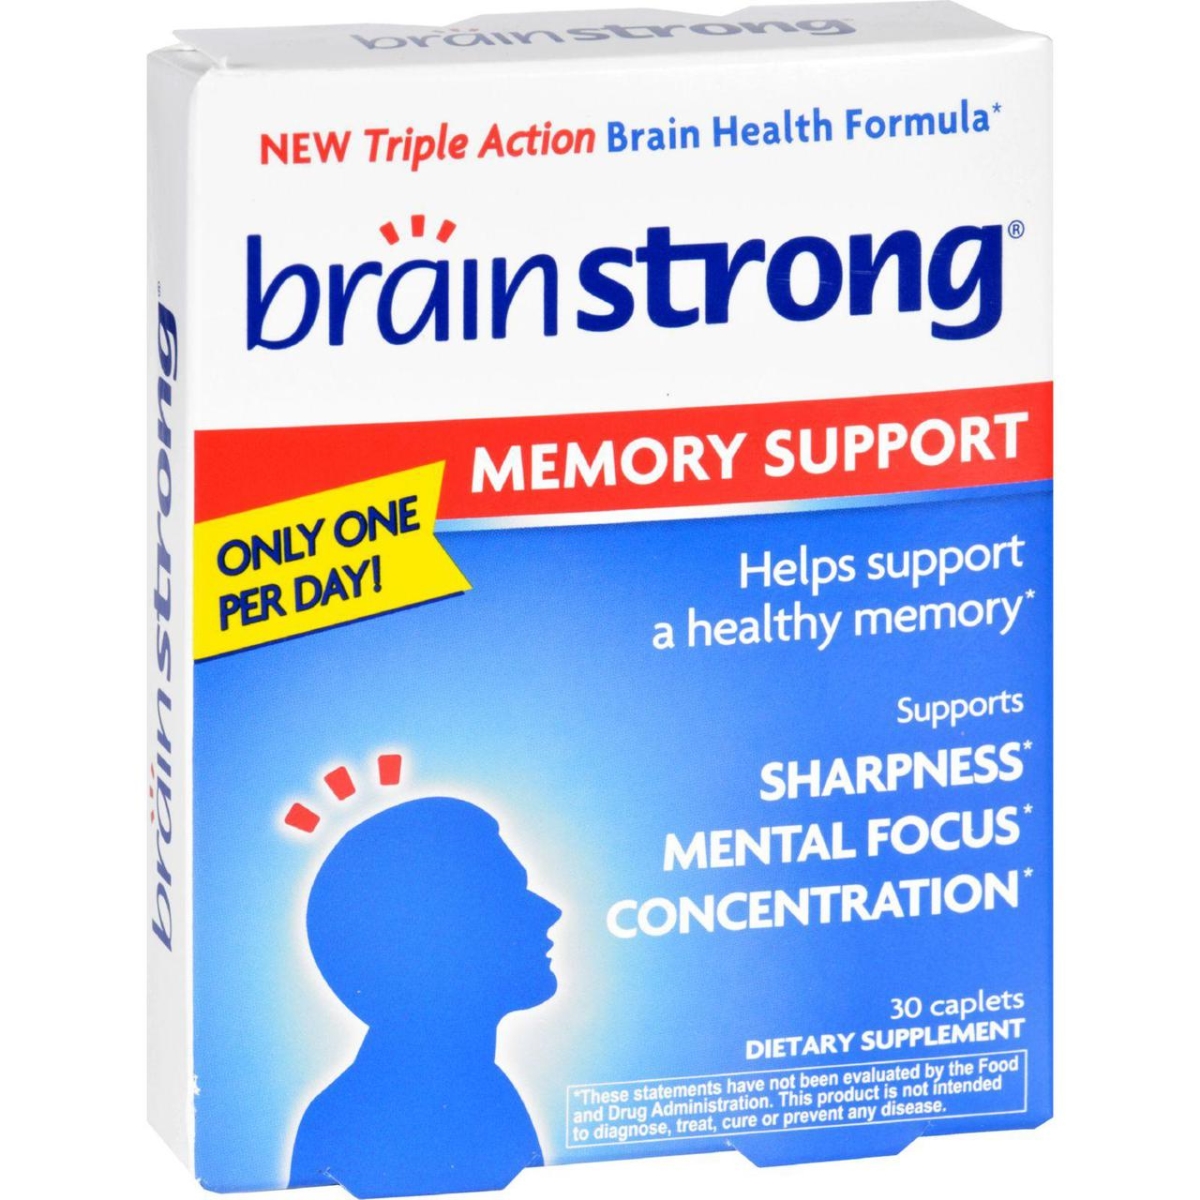 Hg1713312 Memory Support - 30 Capsules